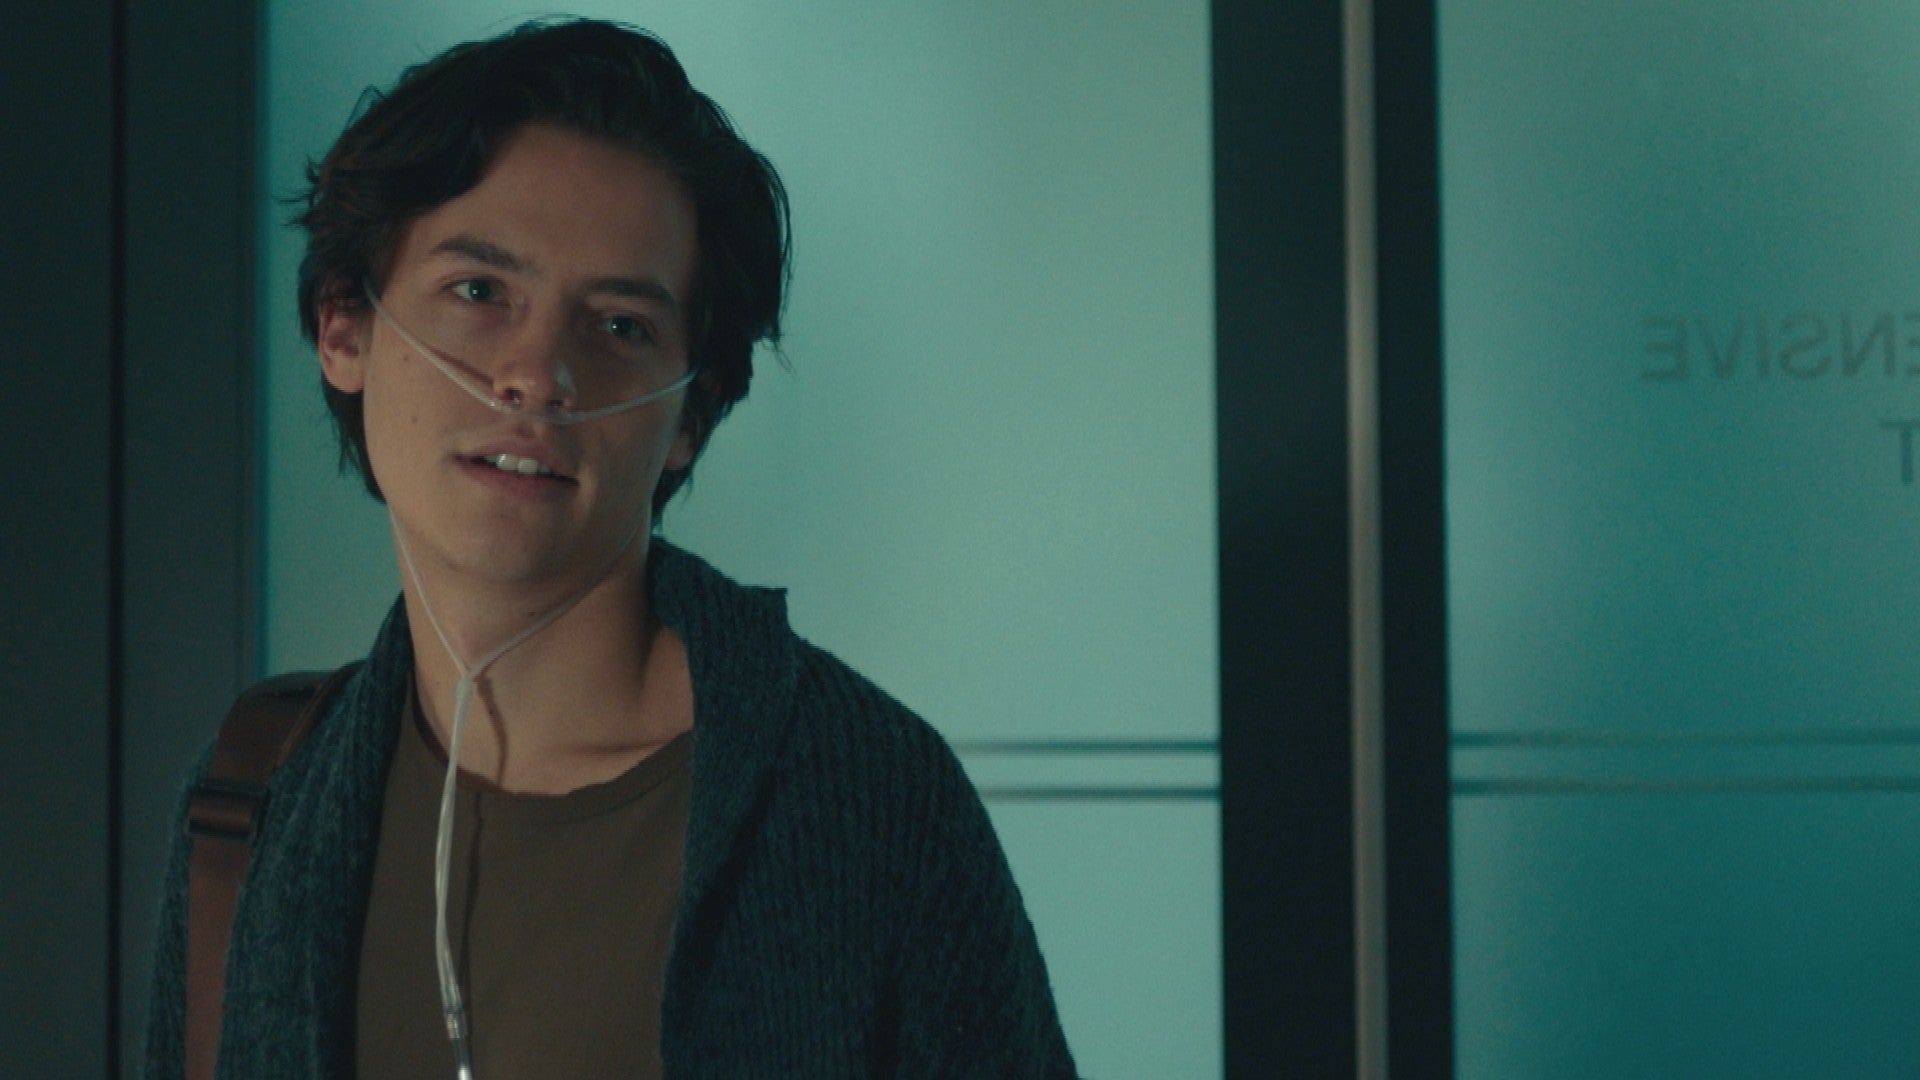 Is Cole Sprouse 'Five Feet Apart' Getting A Sequel? 'All This Time